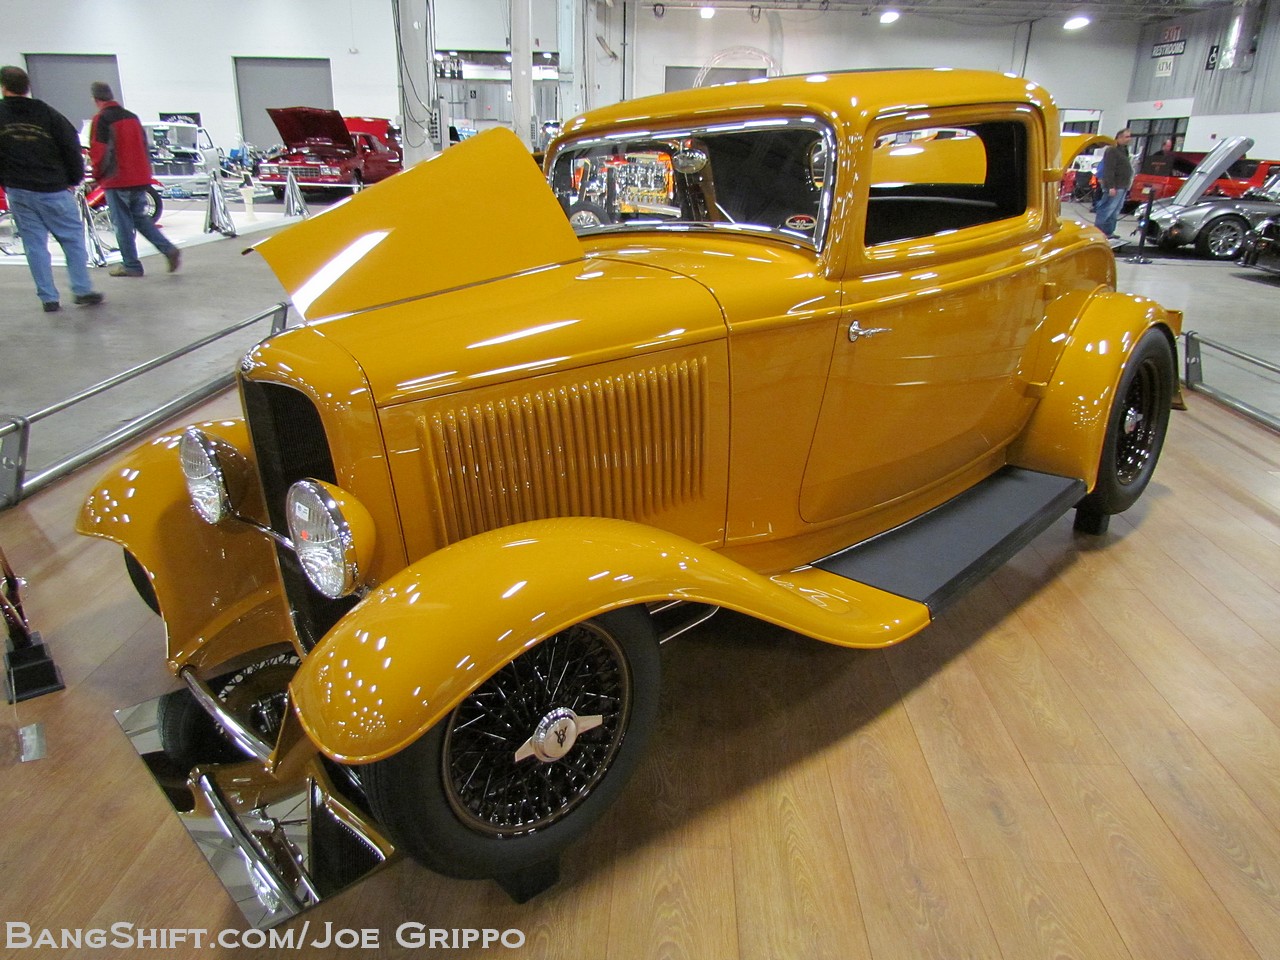 Gallery The 2013 Northeast Rod And Custom